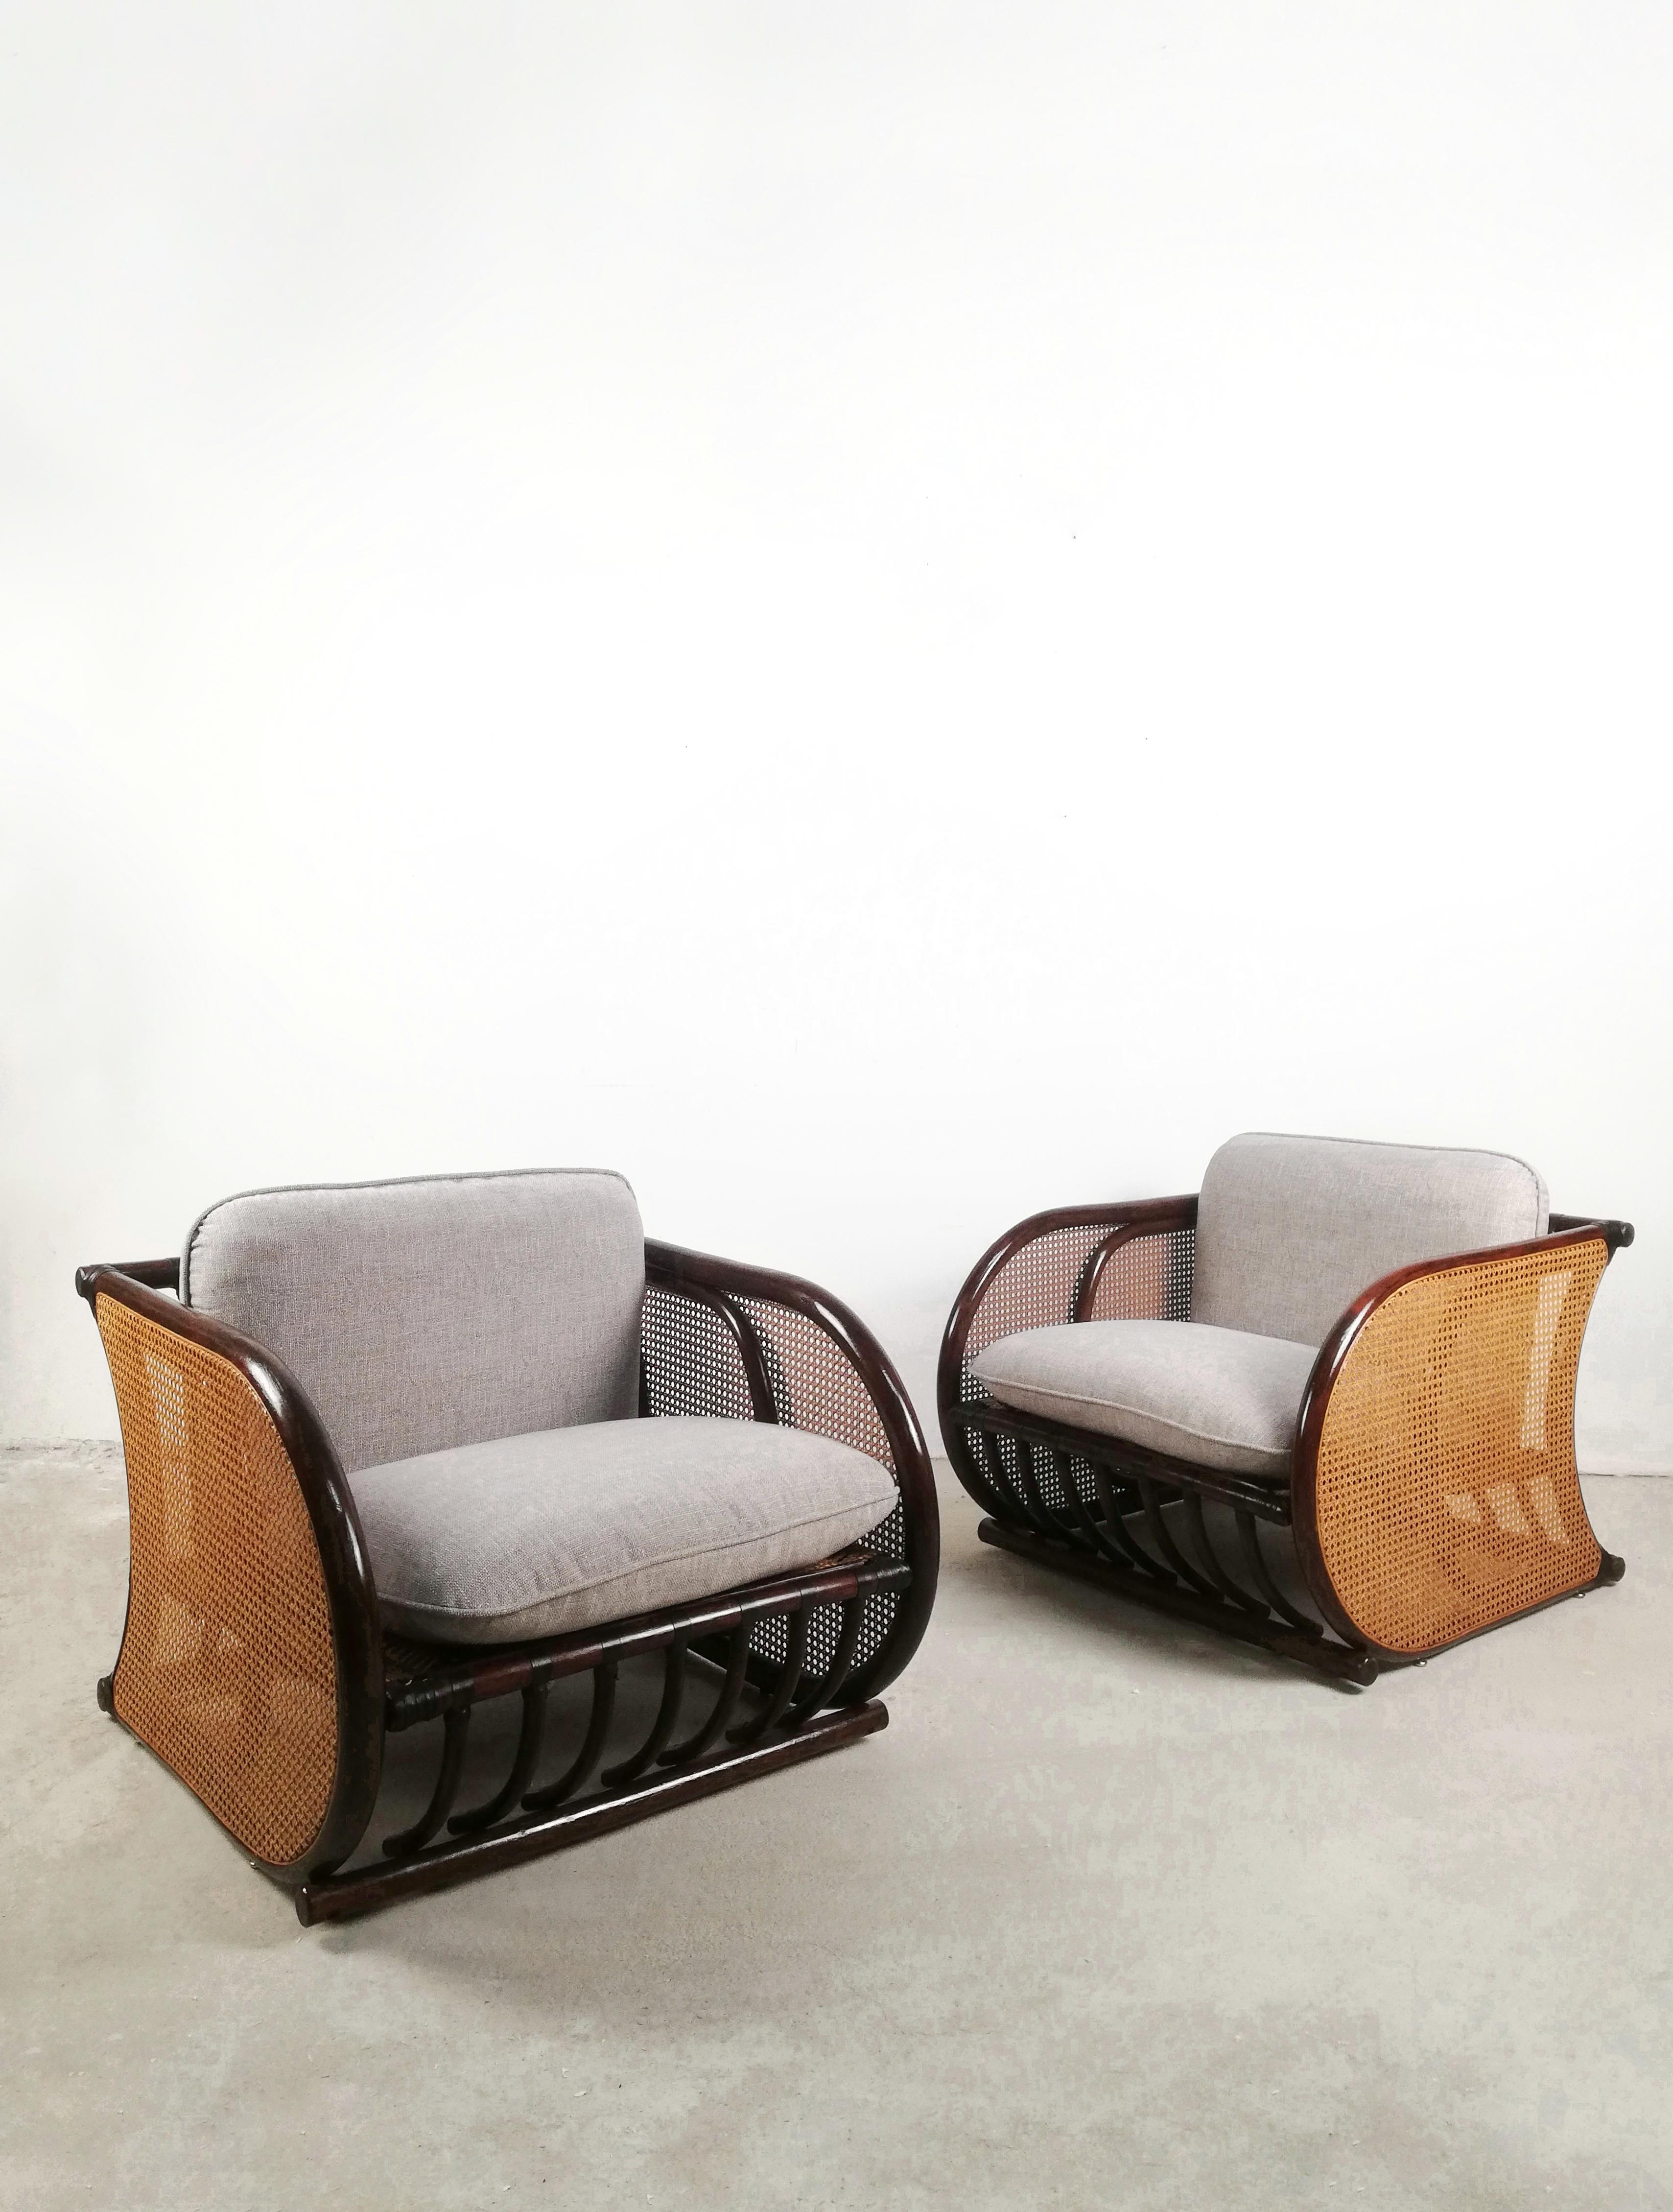 A pair of Splendid Vintage Armchairs totally restored by professional Italian craftsmen.
This Set of 2 armchairs is in full Art Deco style with its rounded sides shielded by Vienna straw; this design recalls the production of 